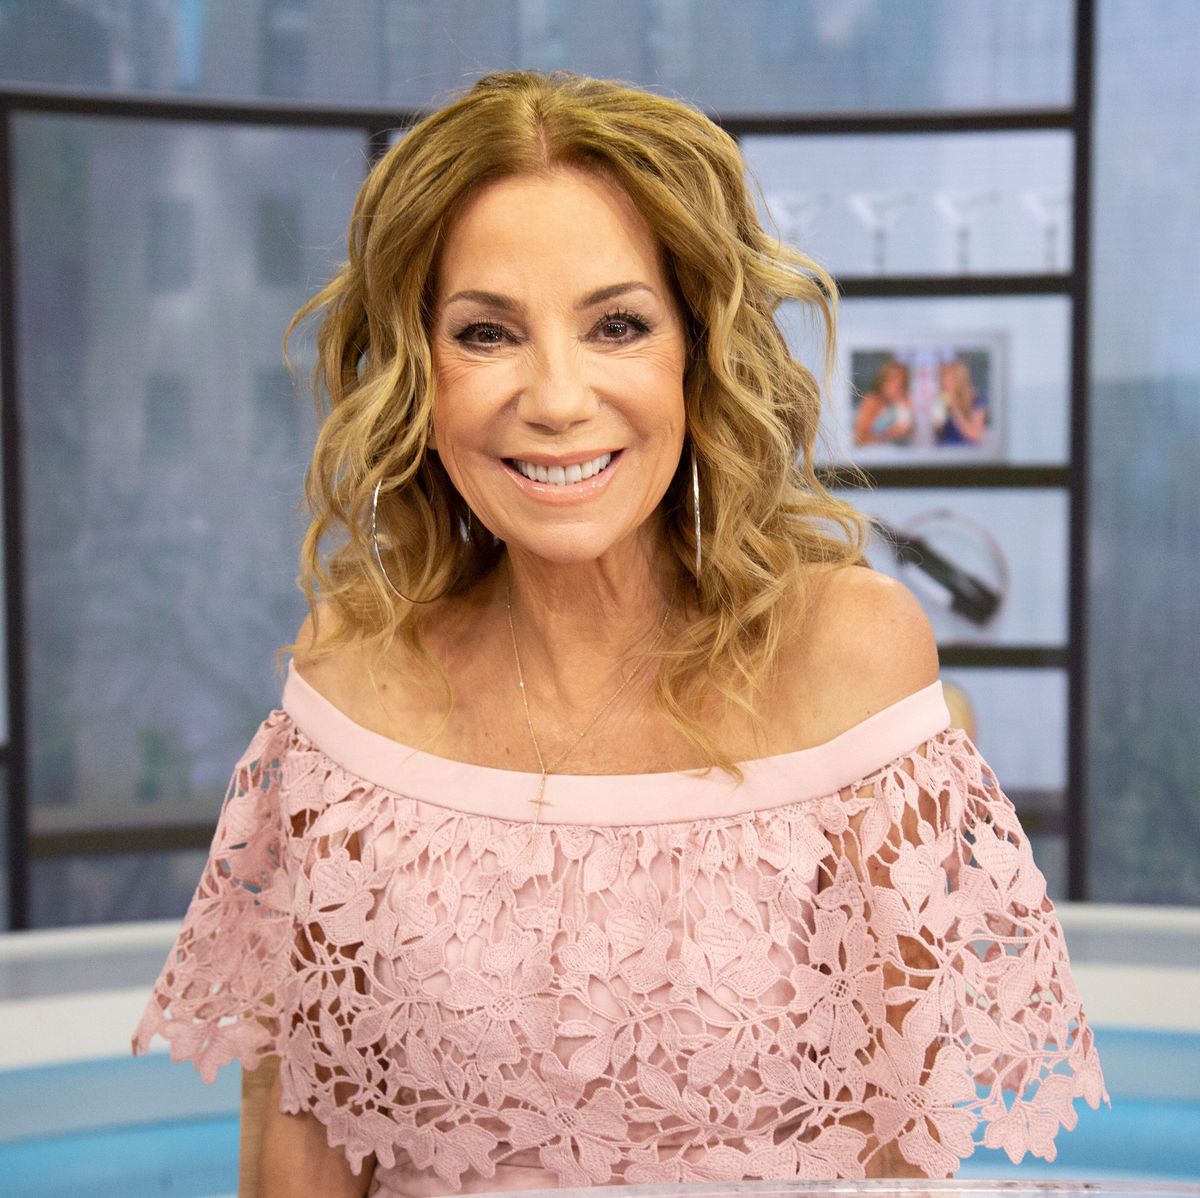 Farewell, Kathie Lee Gifford: The 'Today' Show Star on Leaving Hoda, Her Husband, and New Beginnings